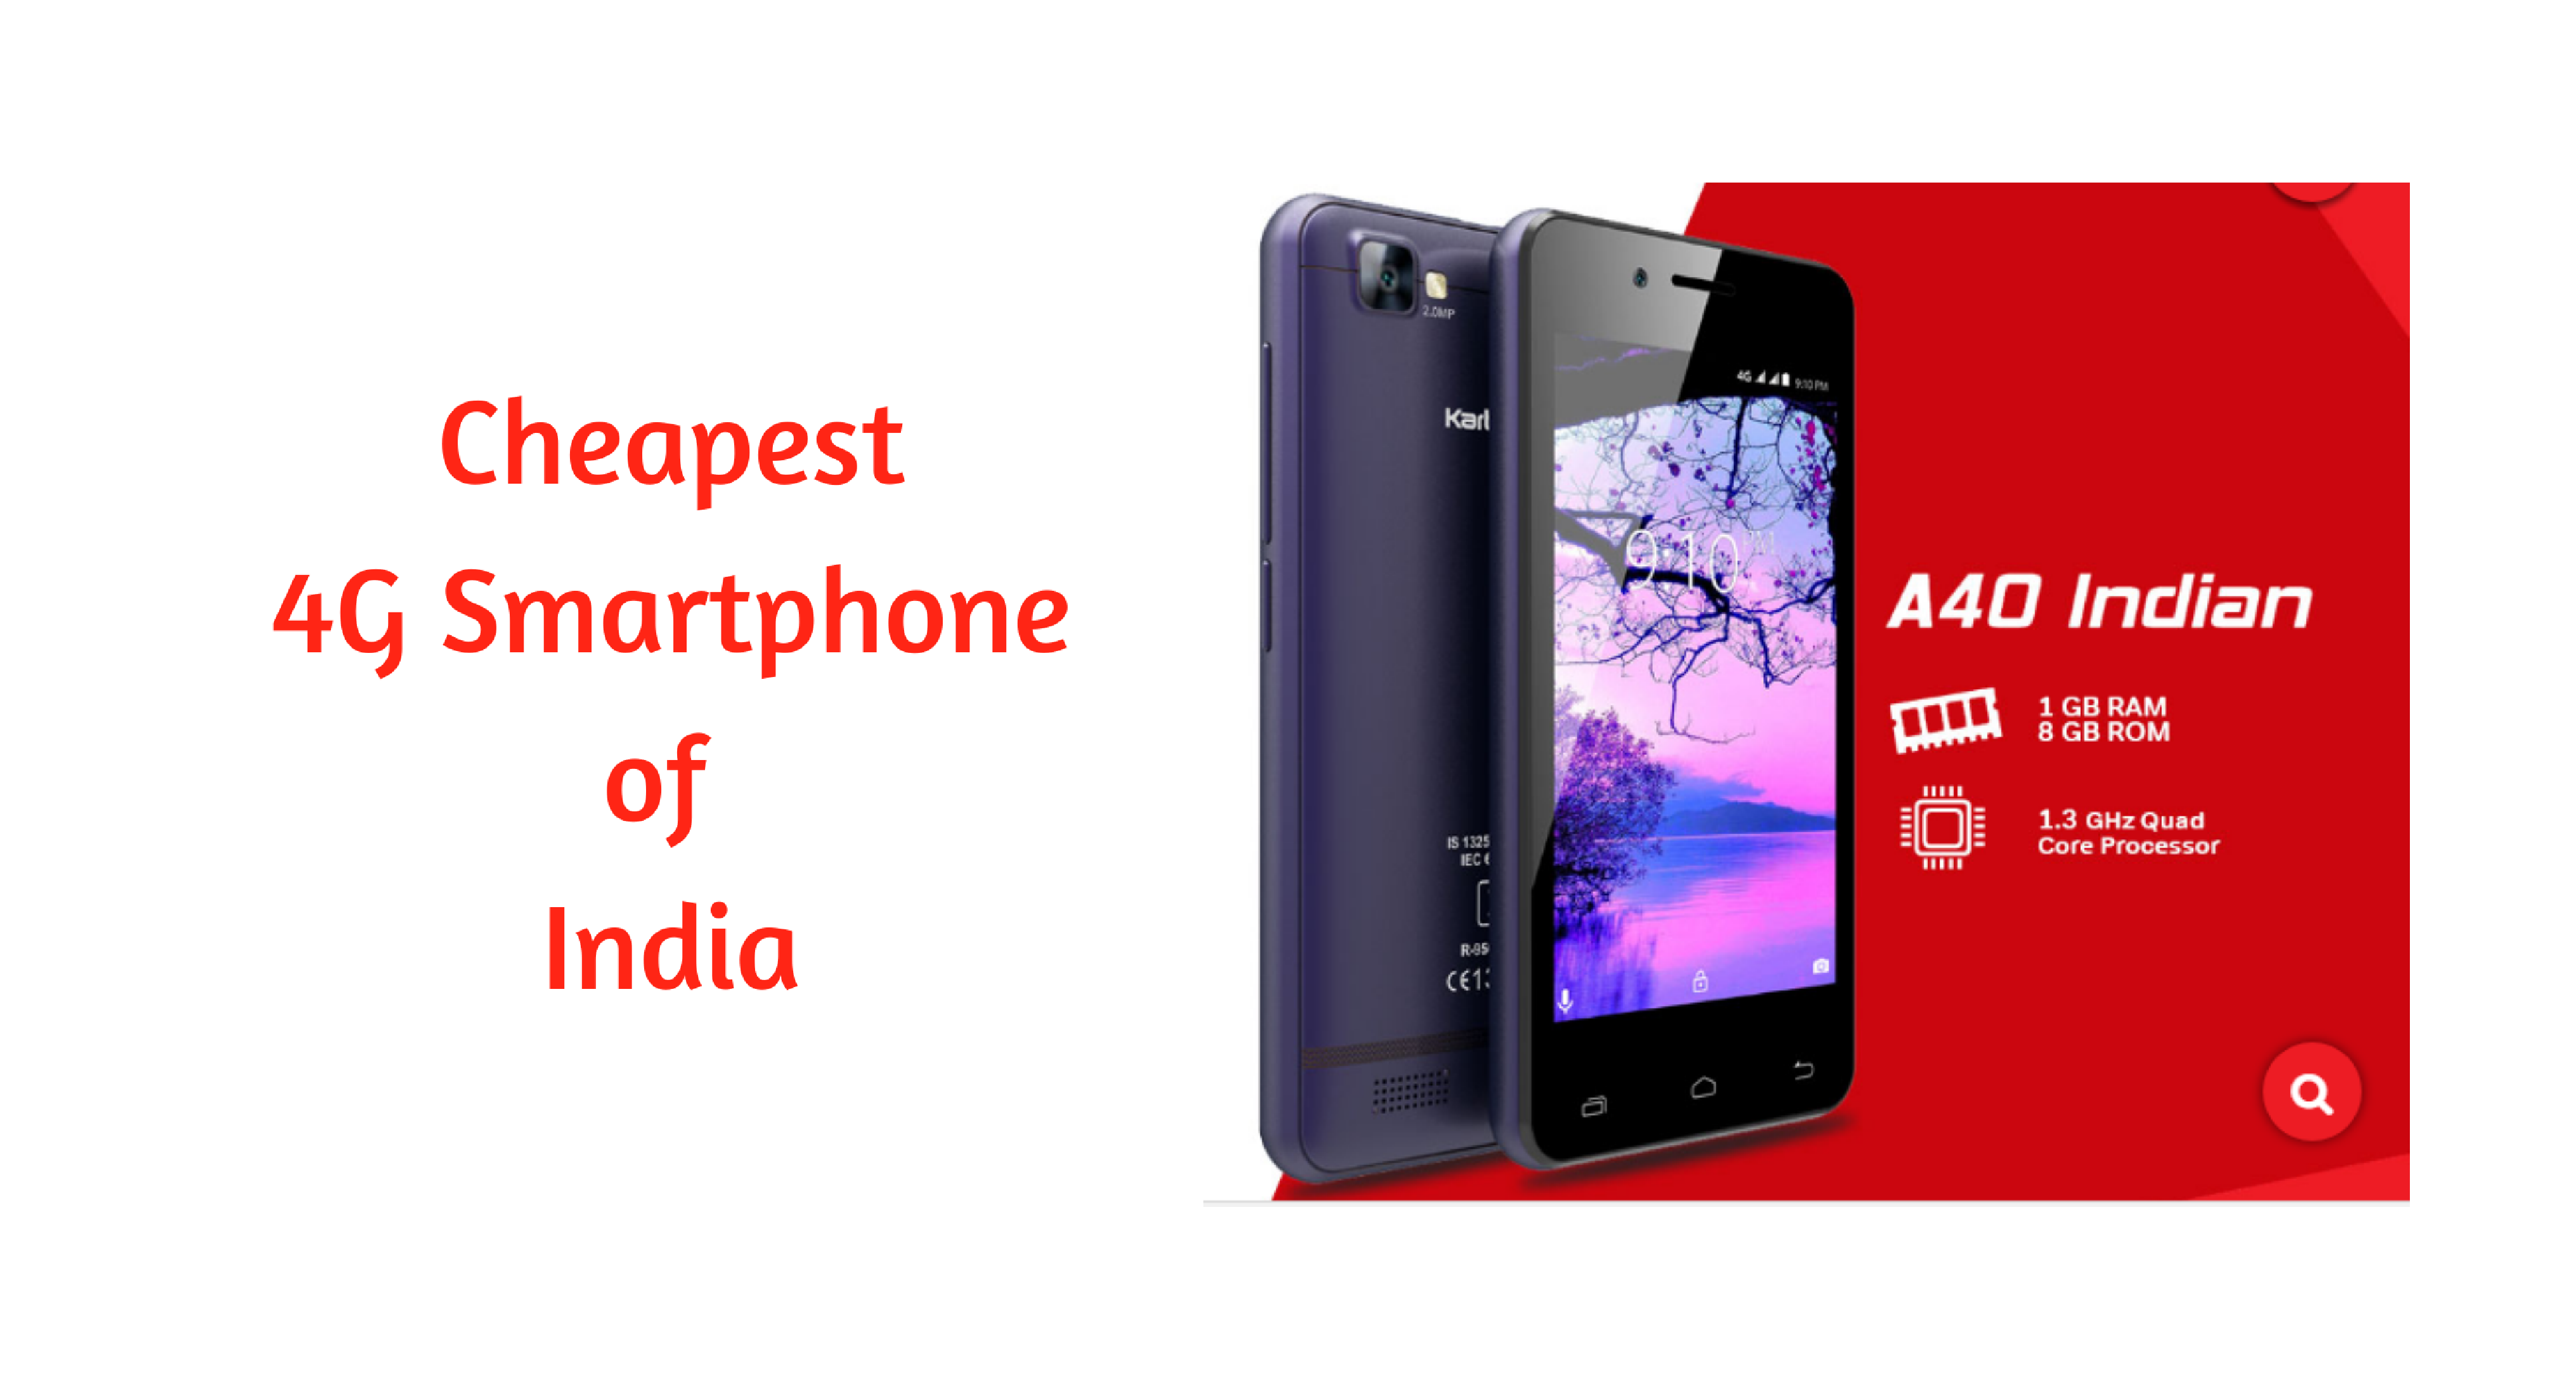 Cheapest 4G Smartphone by Airtel-Karbonn to Compete With Reliance JioPhone